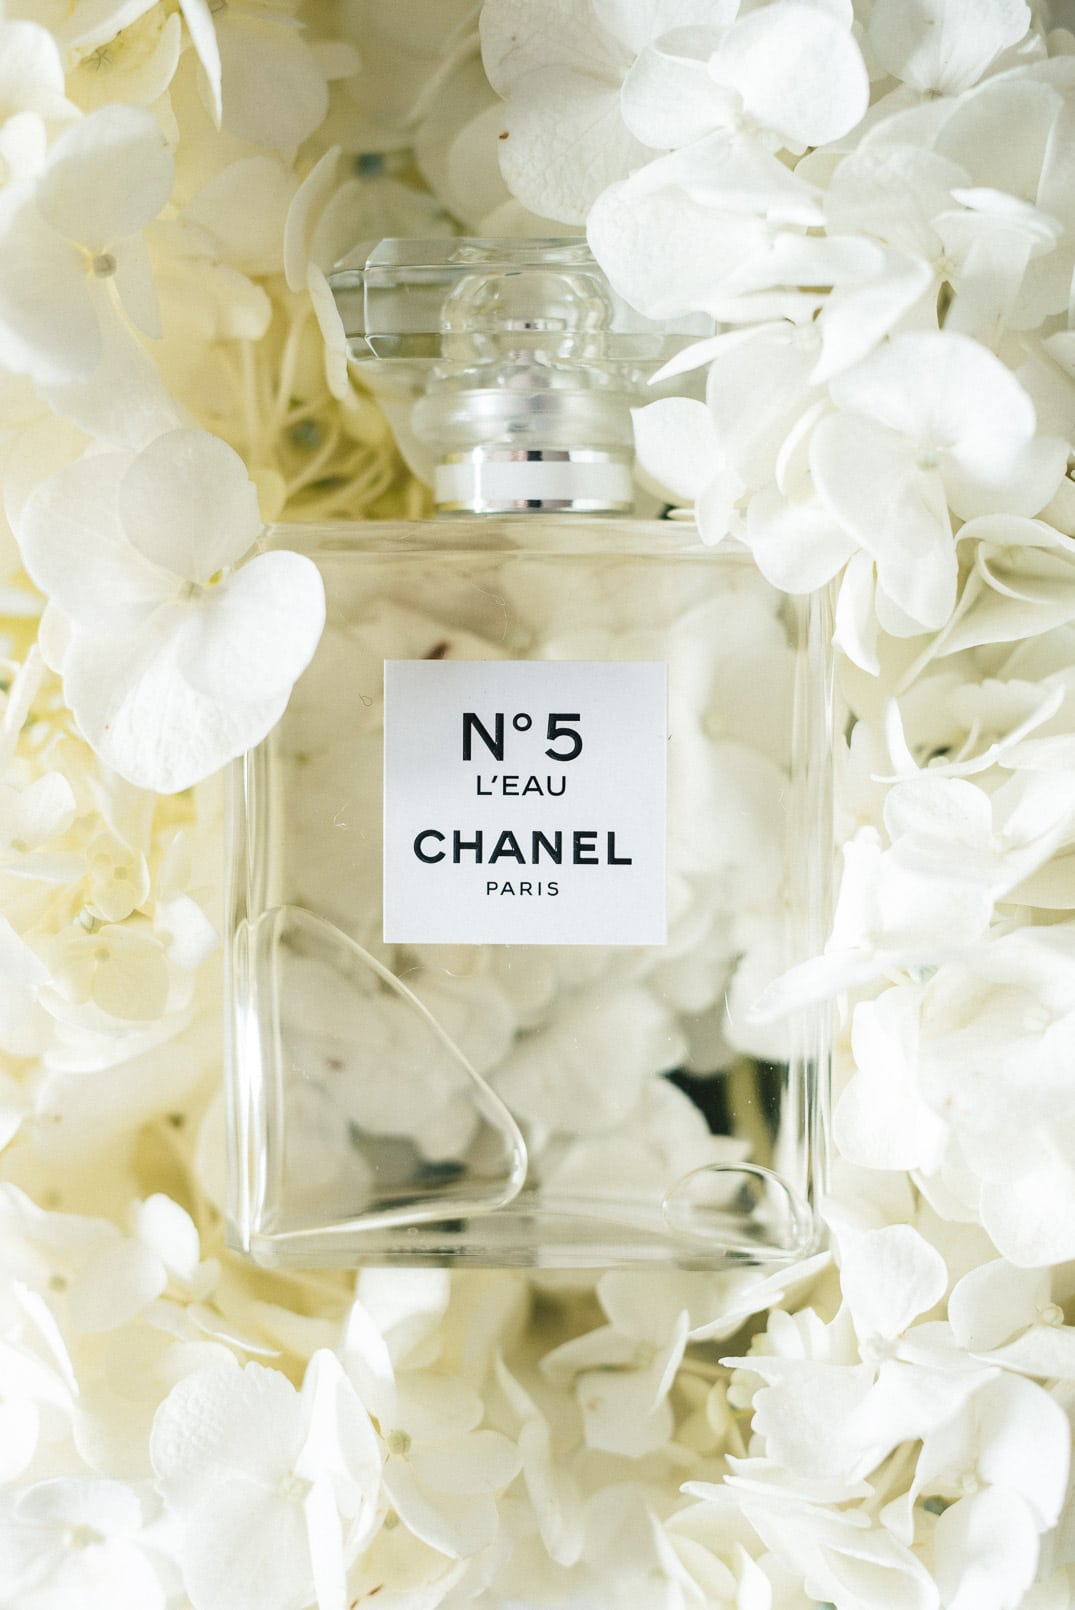 What You Don't Know About the New Chanel N°5 L'EAU - The Girl from